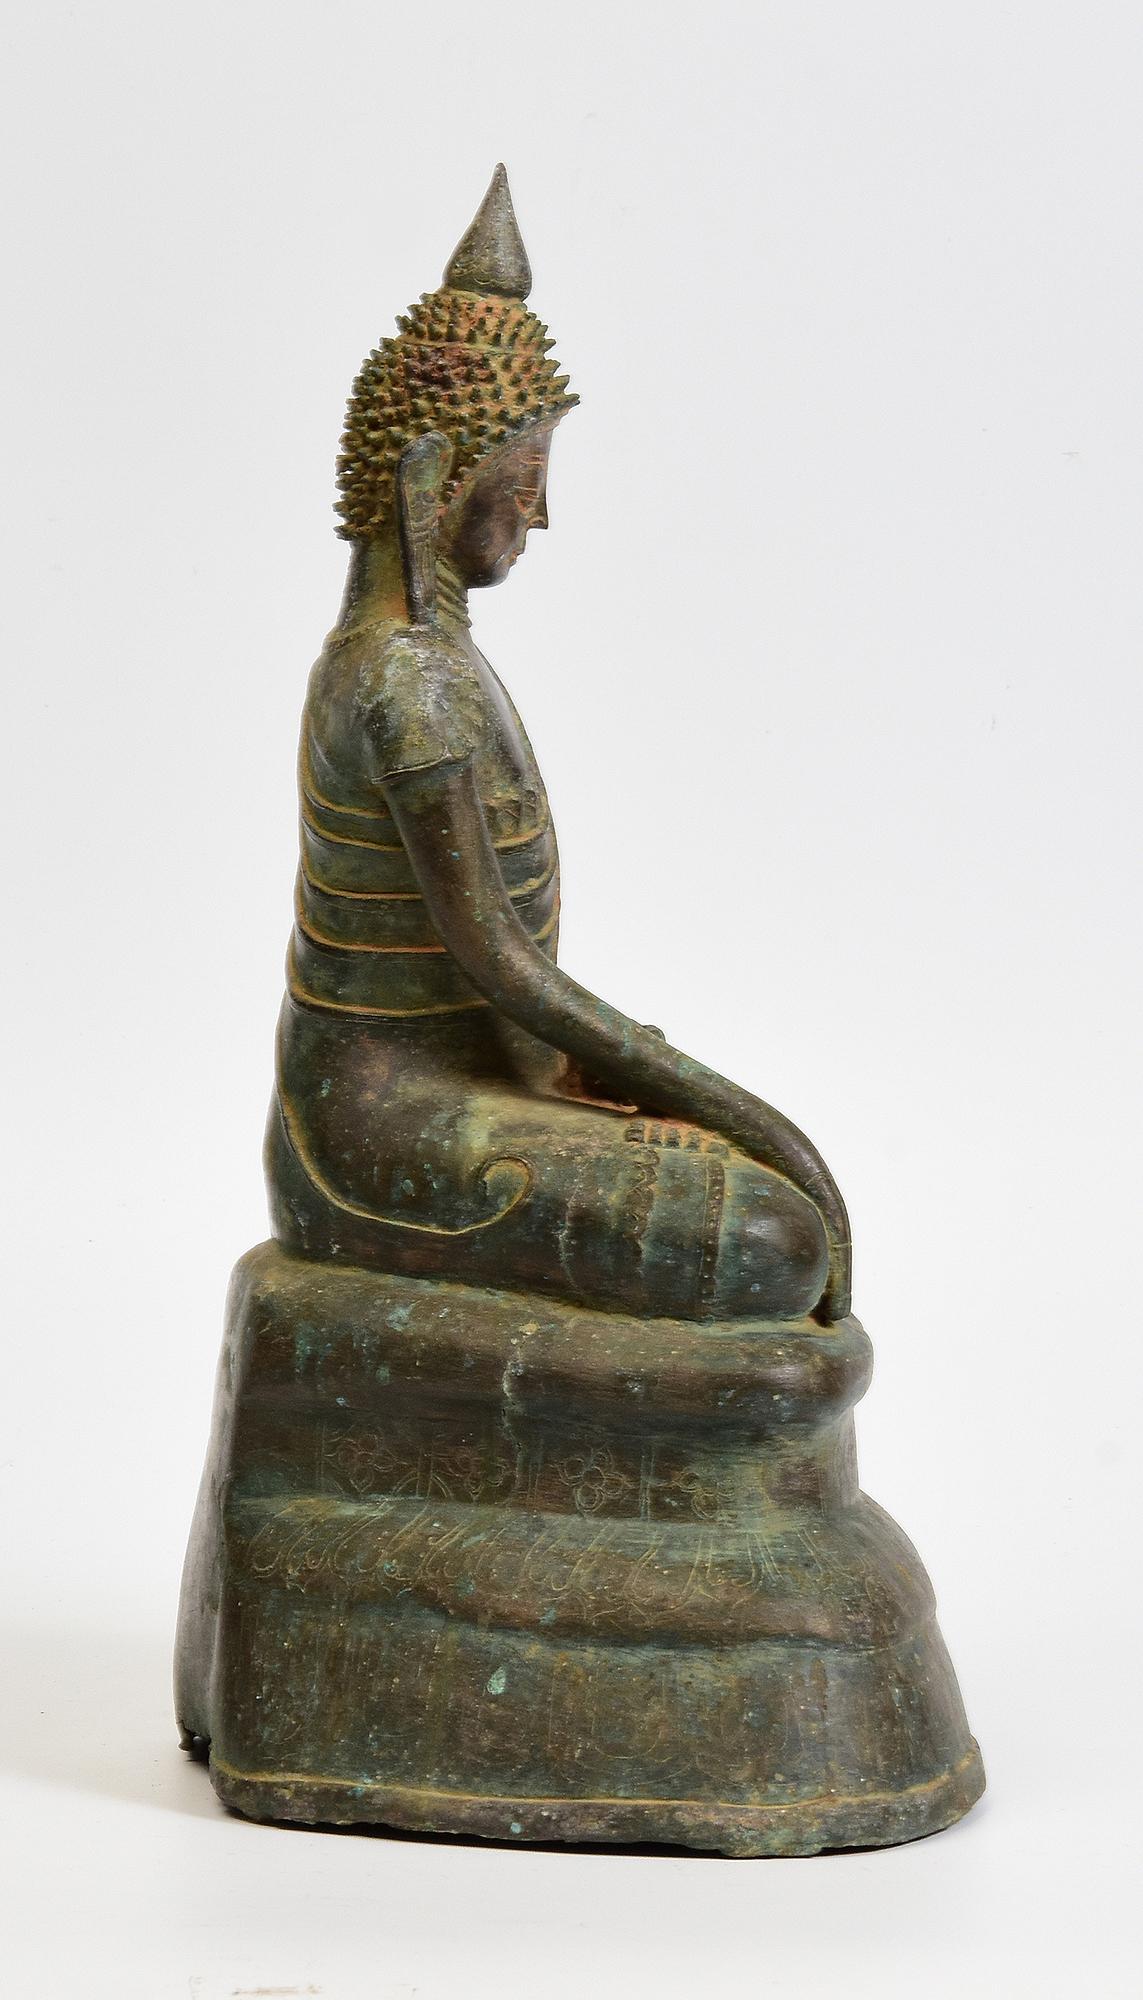 17th Century, Early Shan, Rare Antique Burmese Bronze Seated Buddha For Sale 5